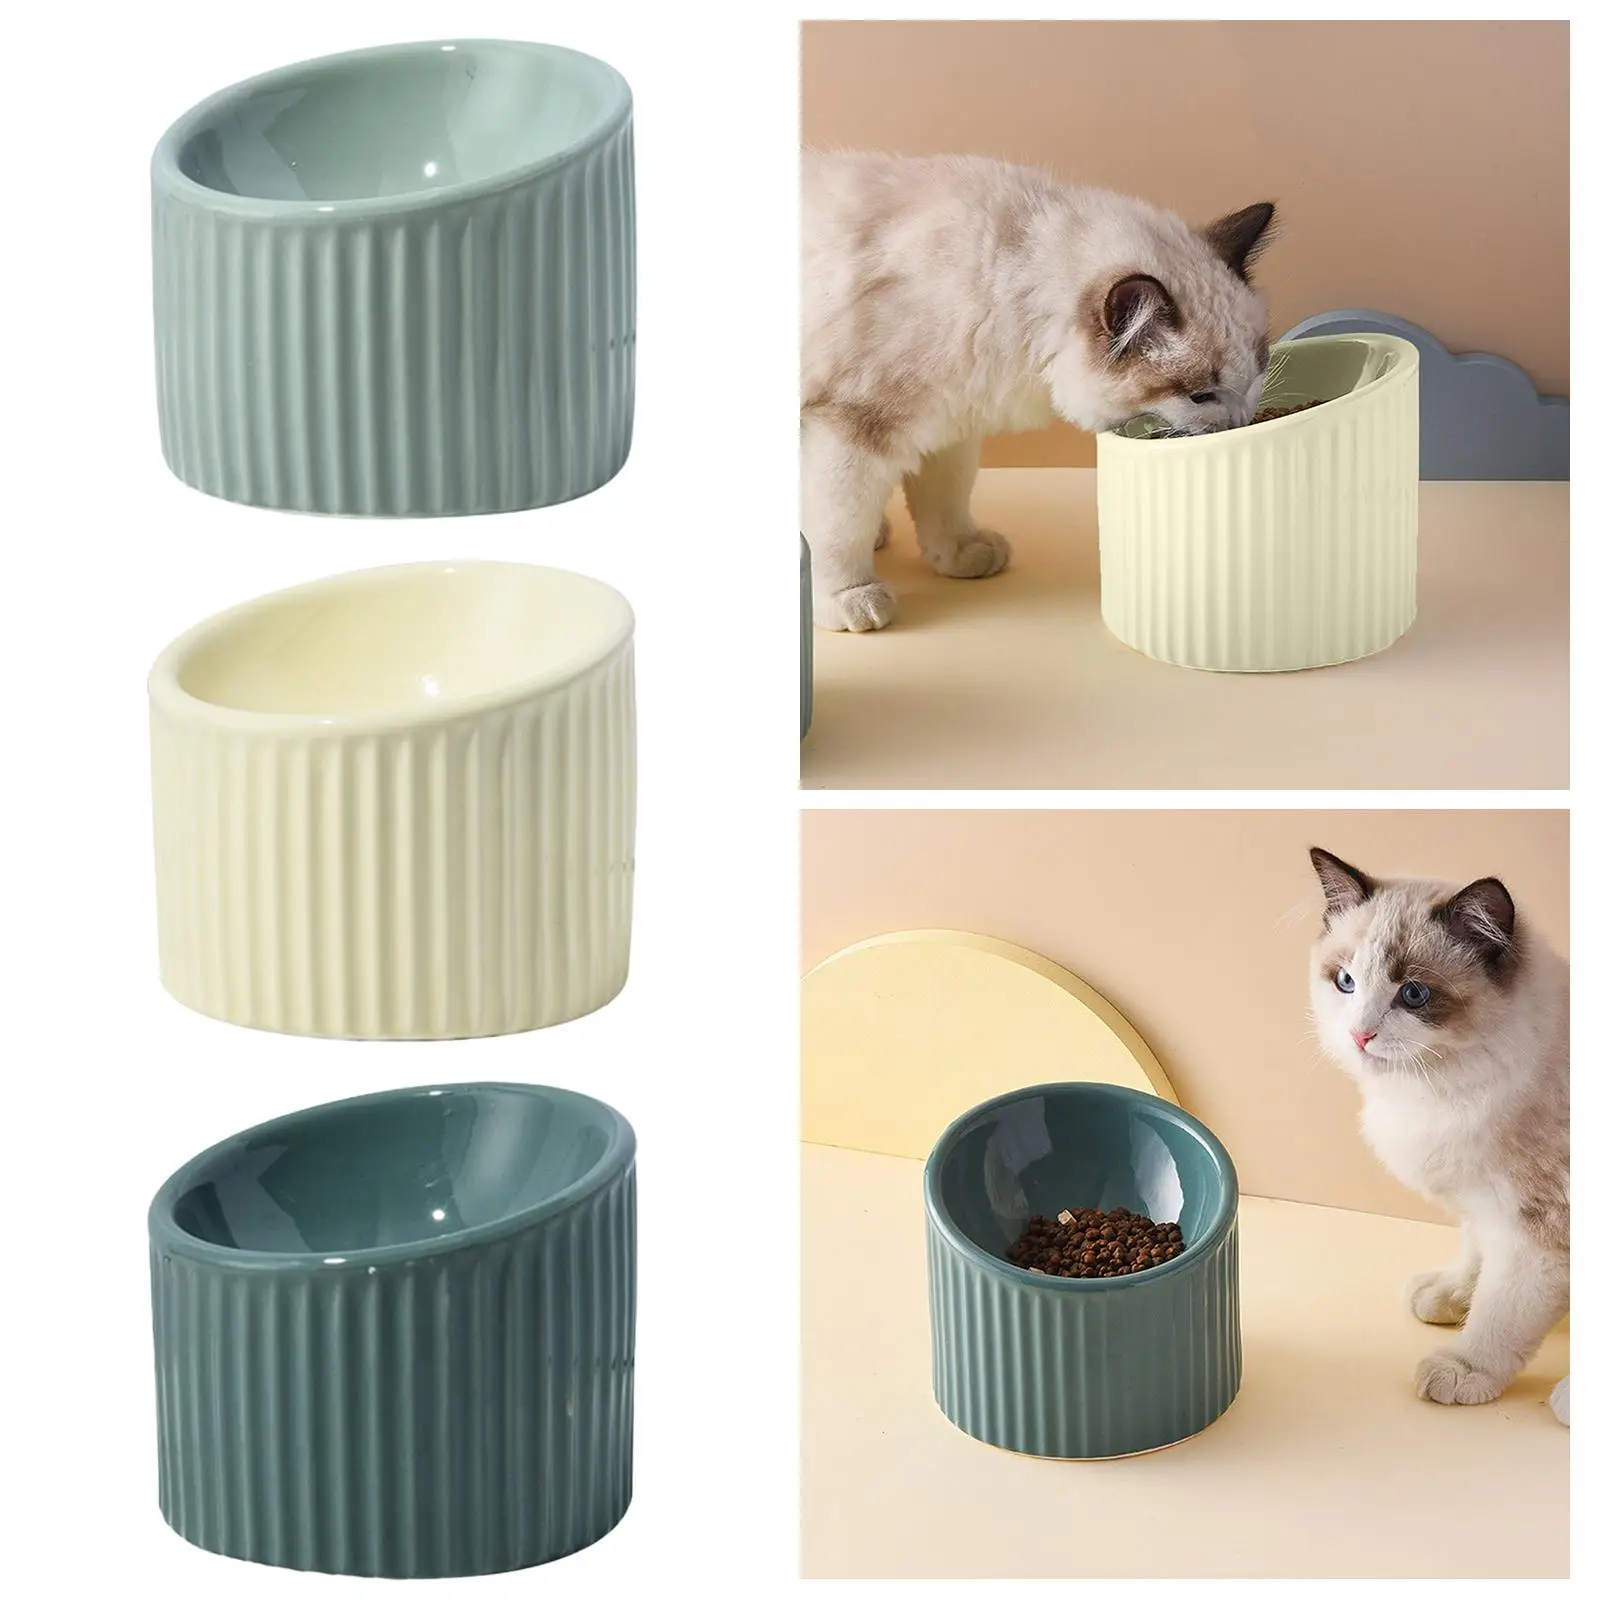 Pet Feeder Slanted Shallow Cat Dish Cute Ceramic Tilted Elevated Cat Bowl